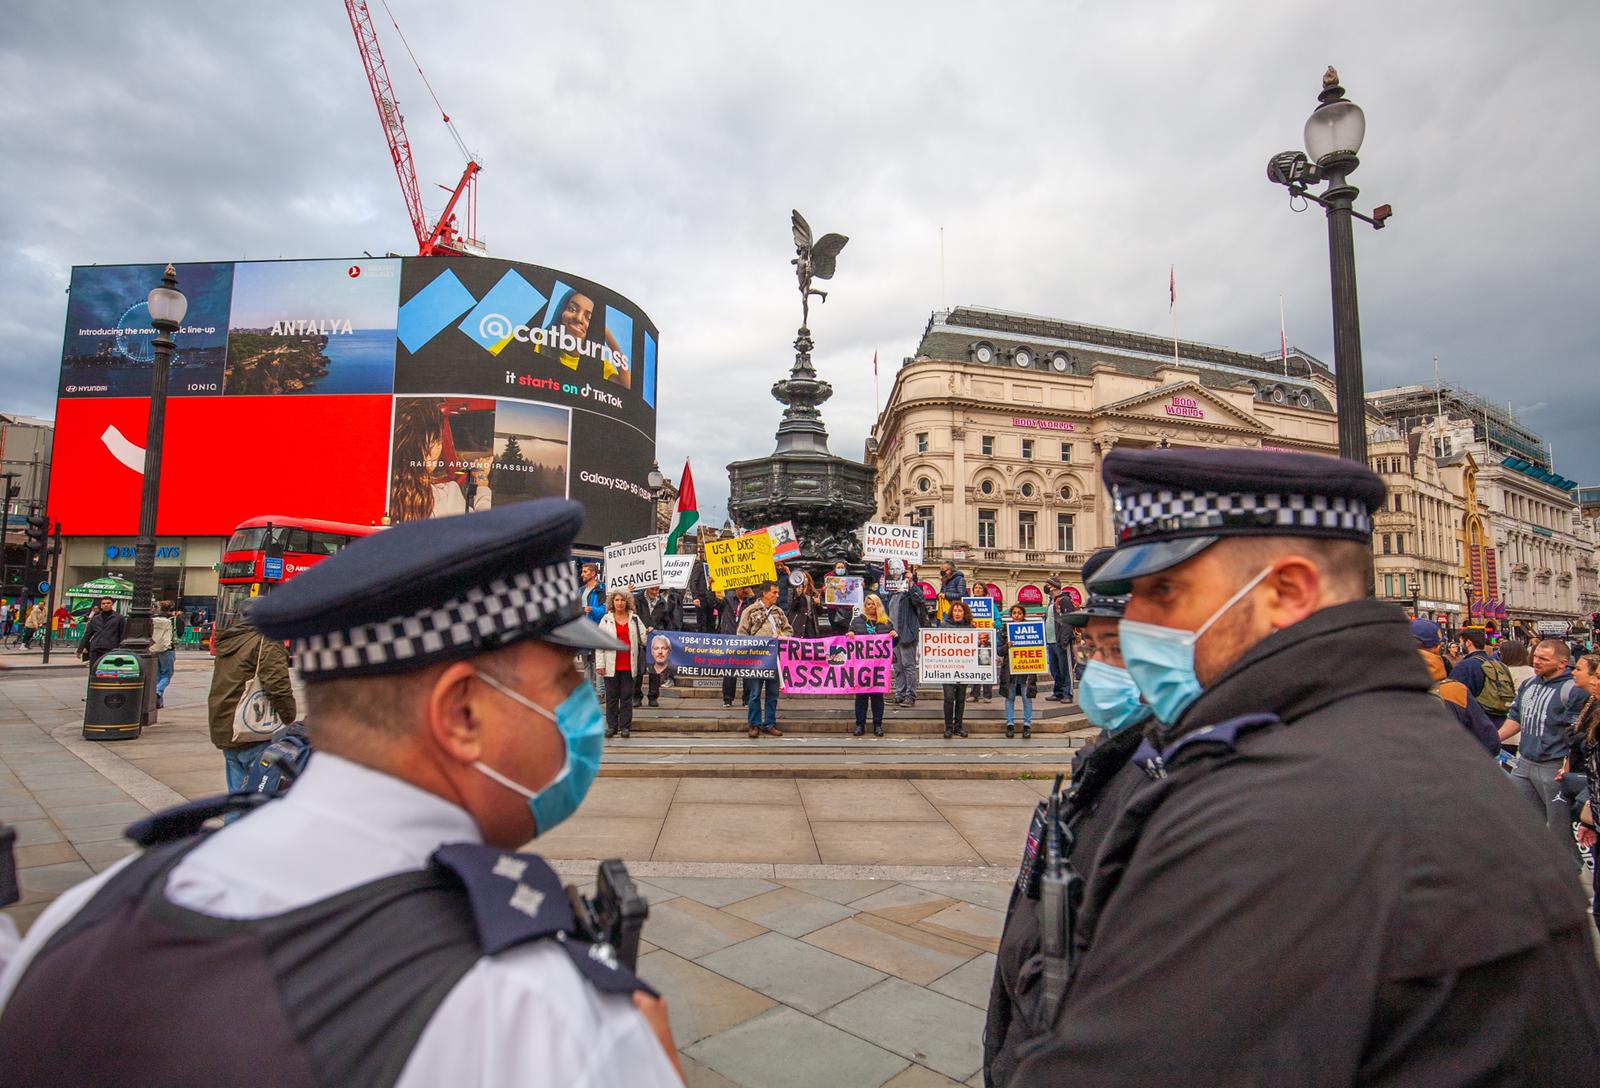 protest_photos:angle-of-approach-piccadilly-circus-london-3oct20.jpg